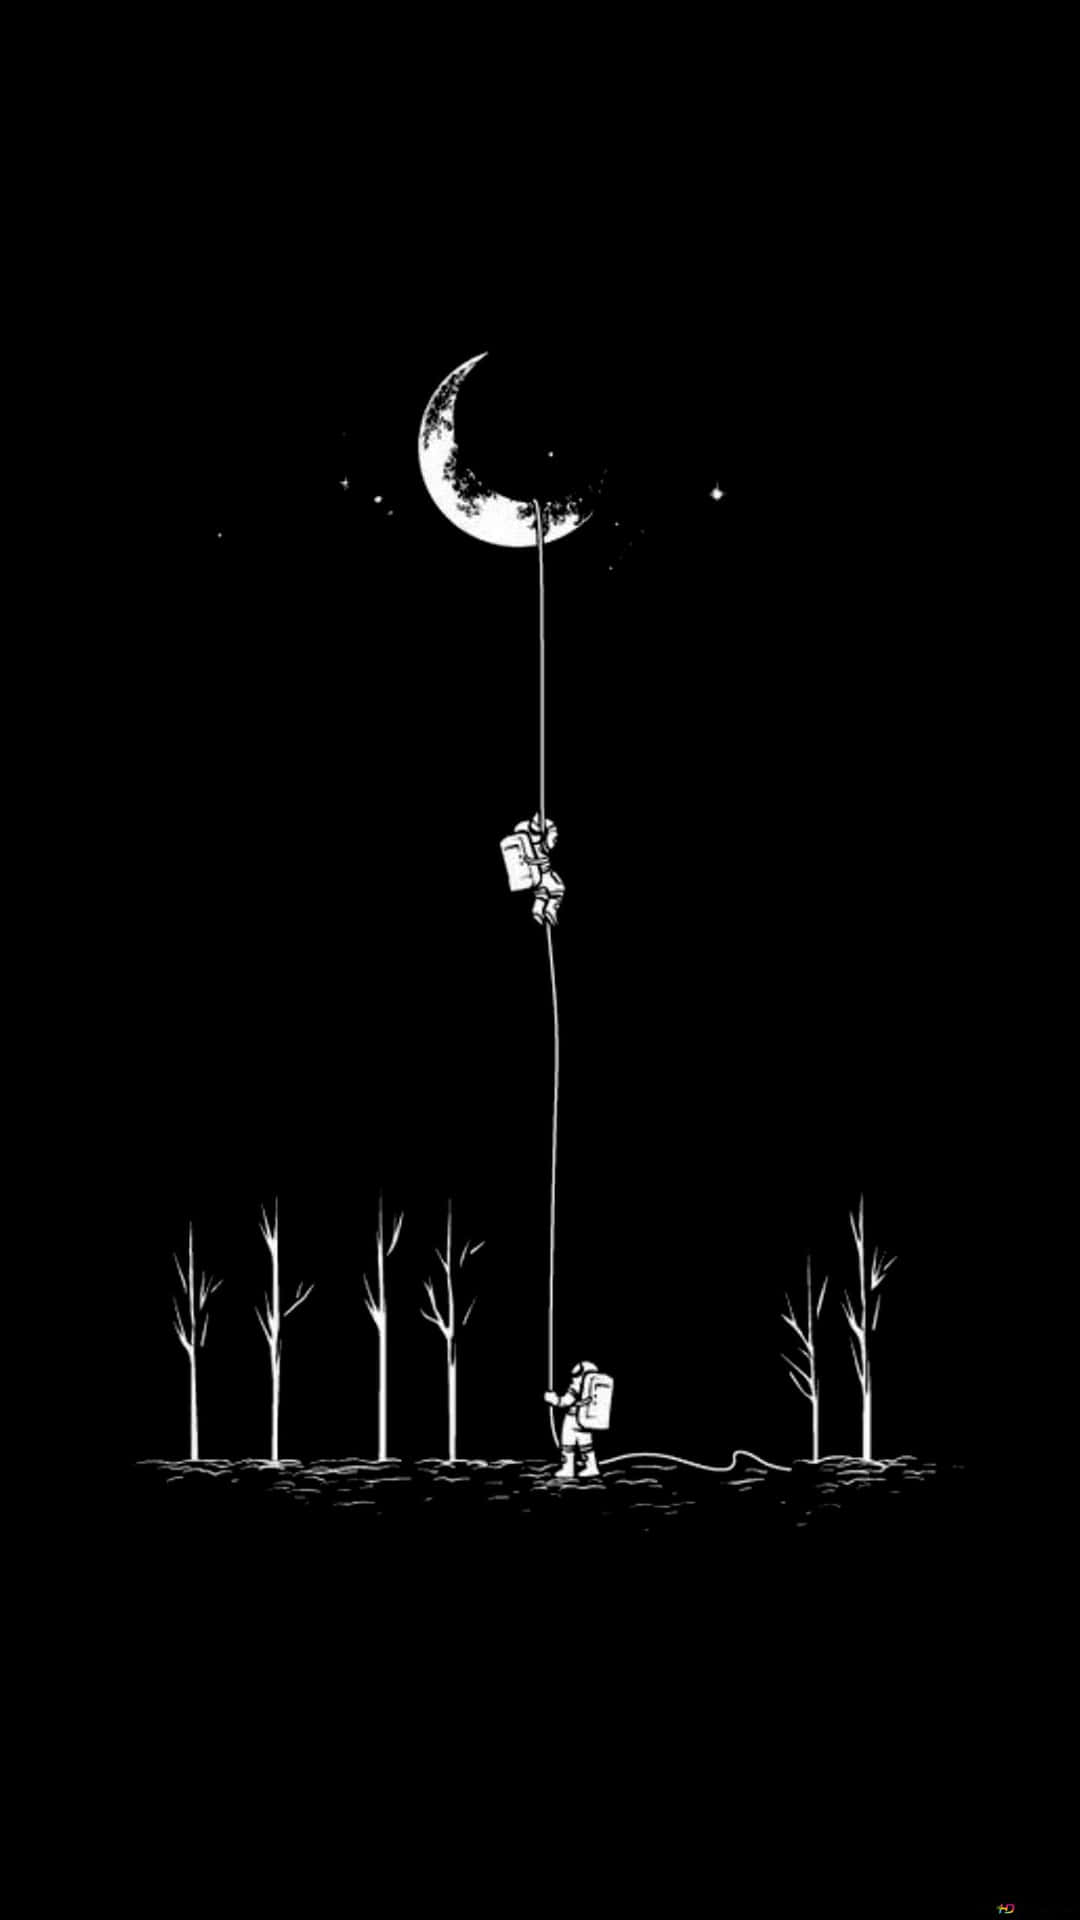 A Man Is Hanging From A Rope In The Dark Background